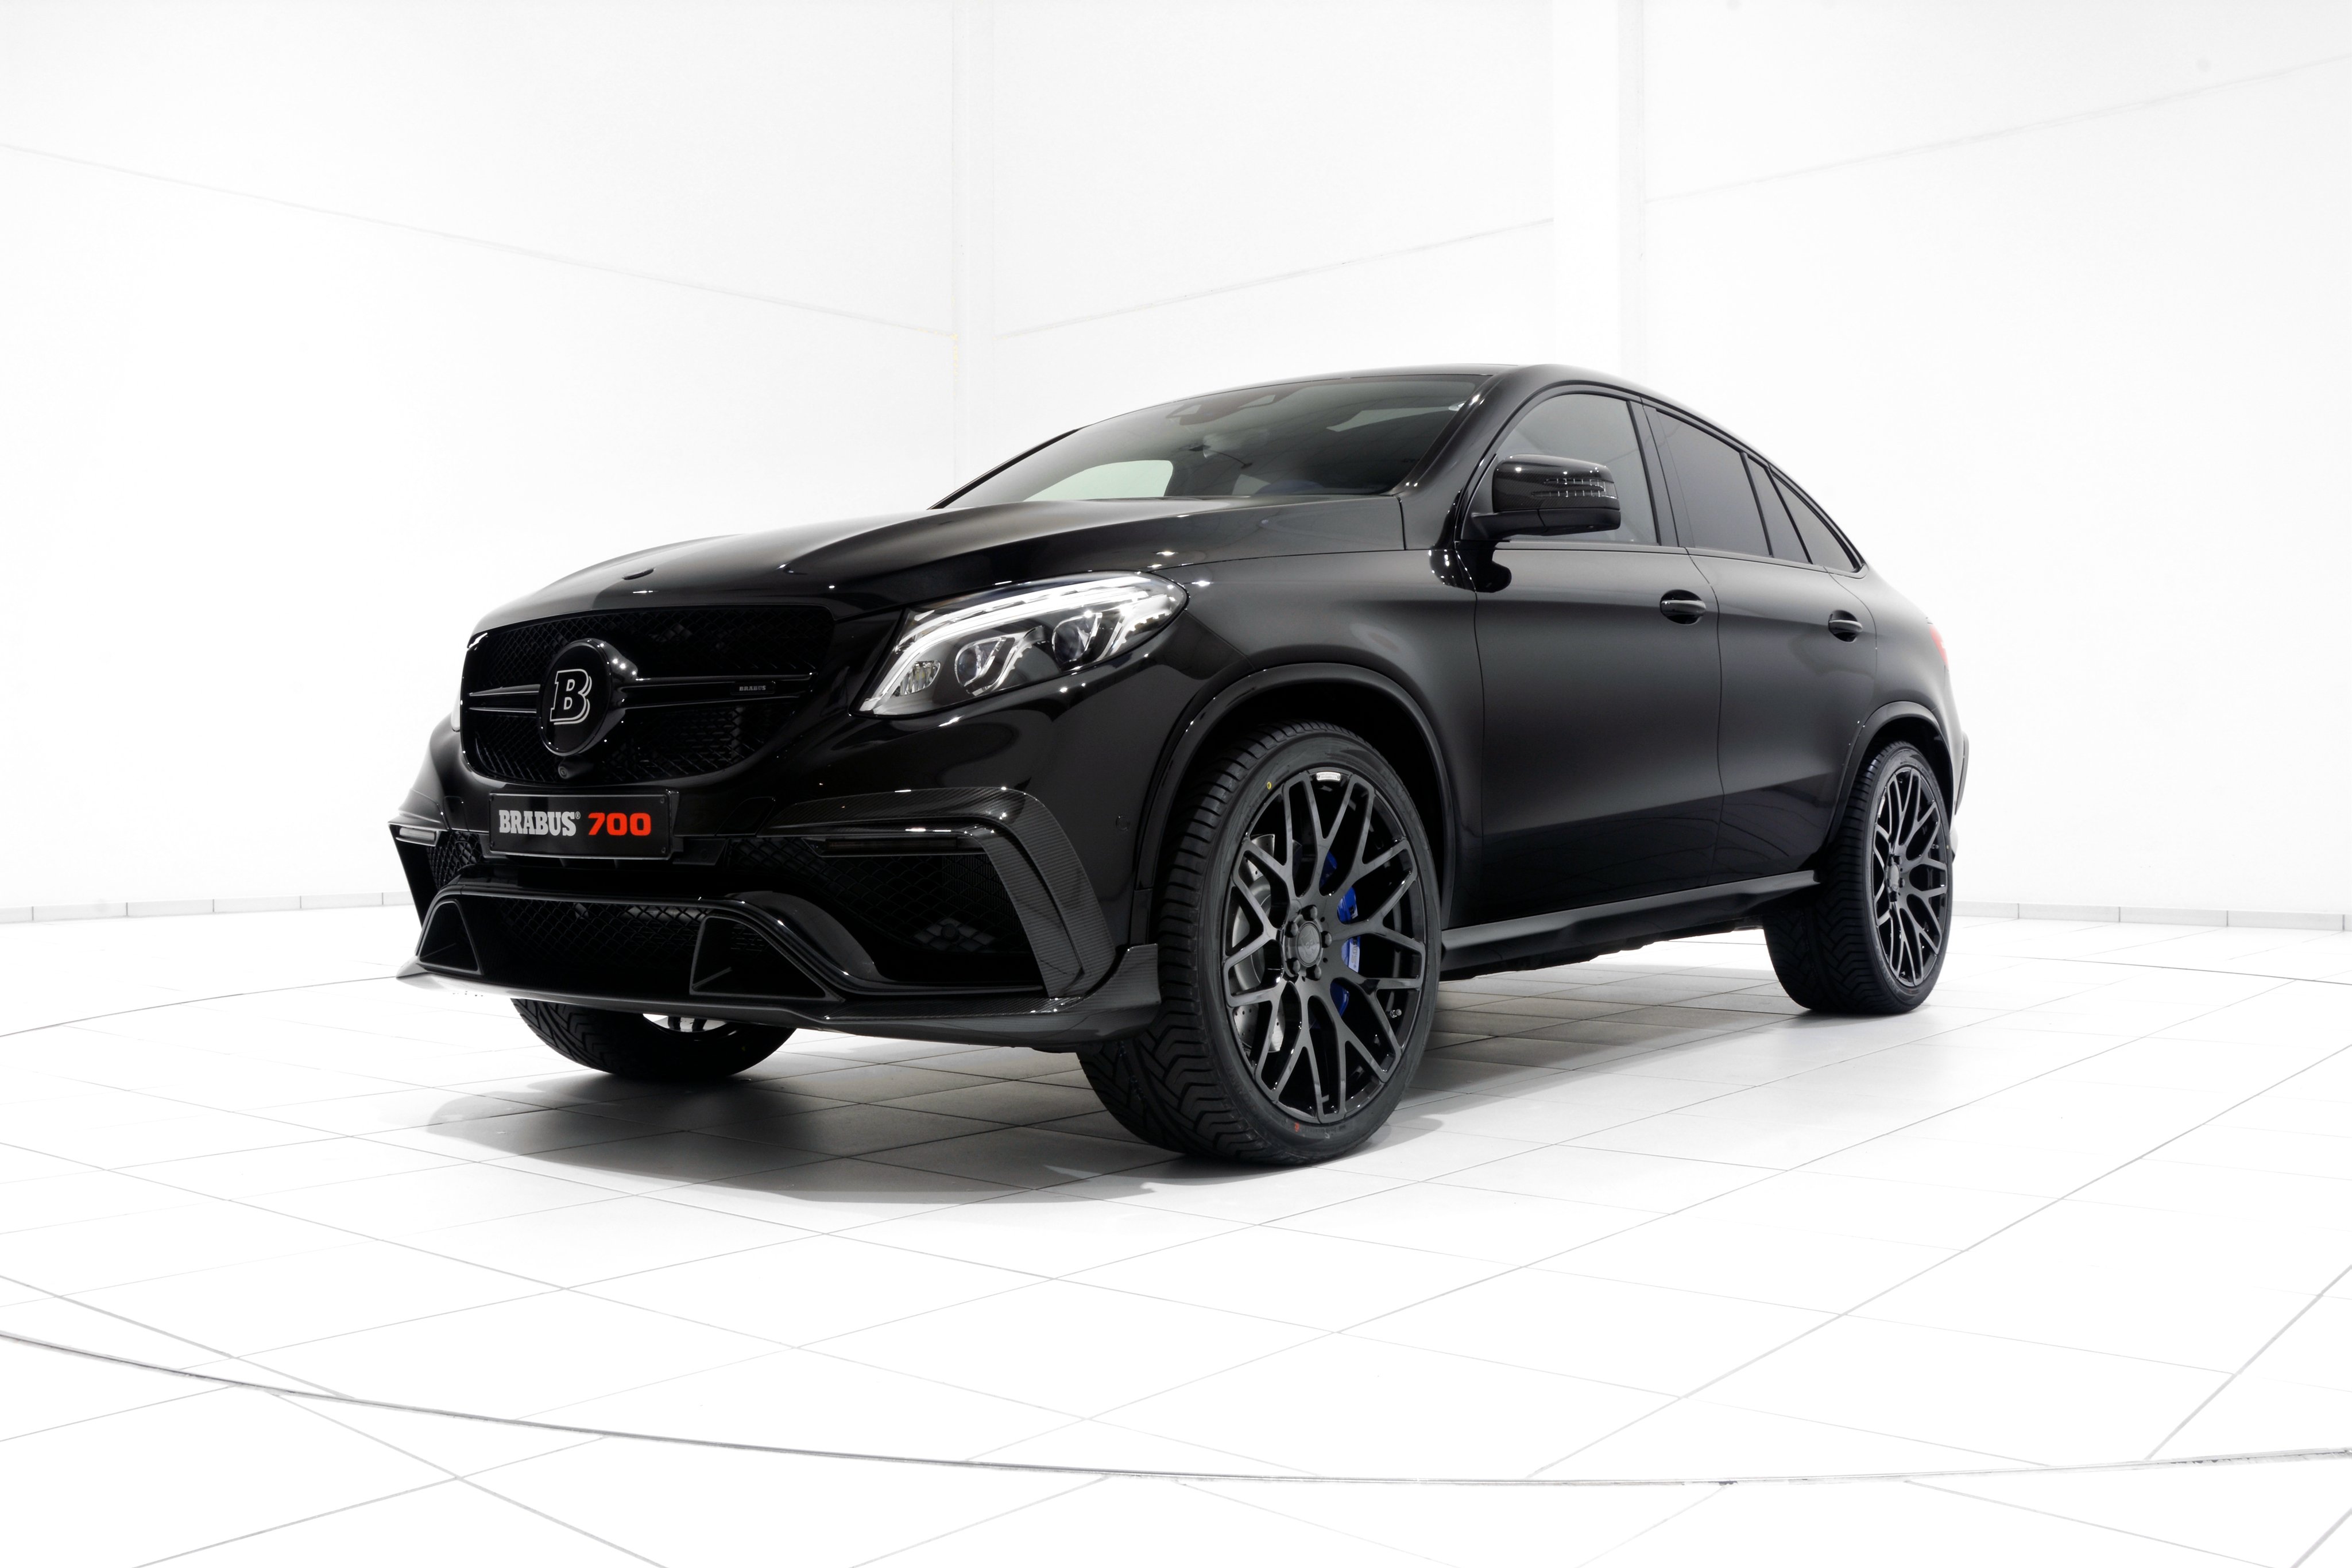 brabus, Mercedes, Amg, Gle 63, 4matic, Coupe, Cars, Suv, 2015 Wallpaper